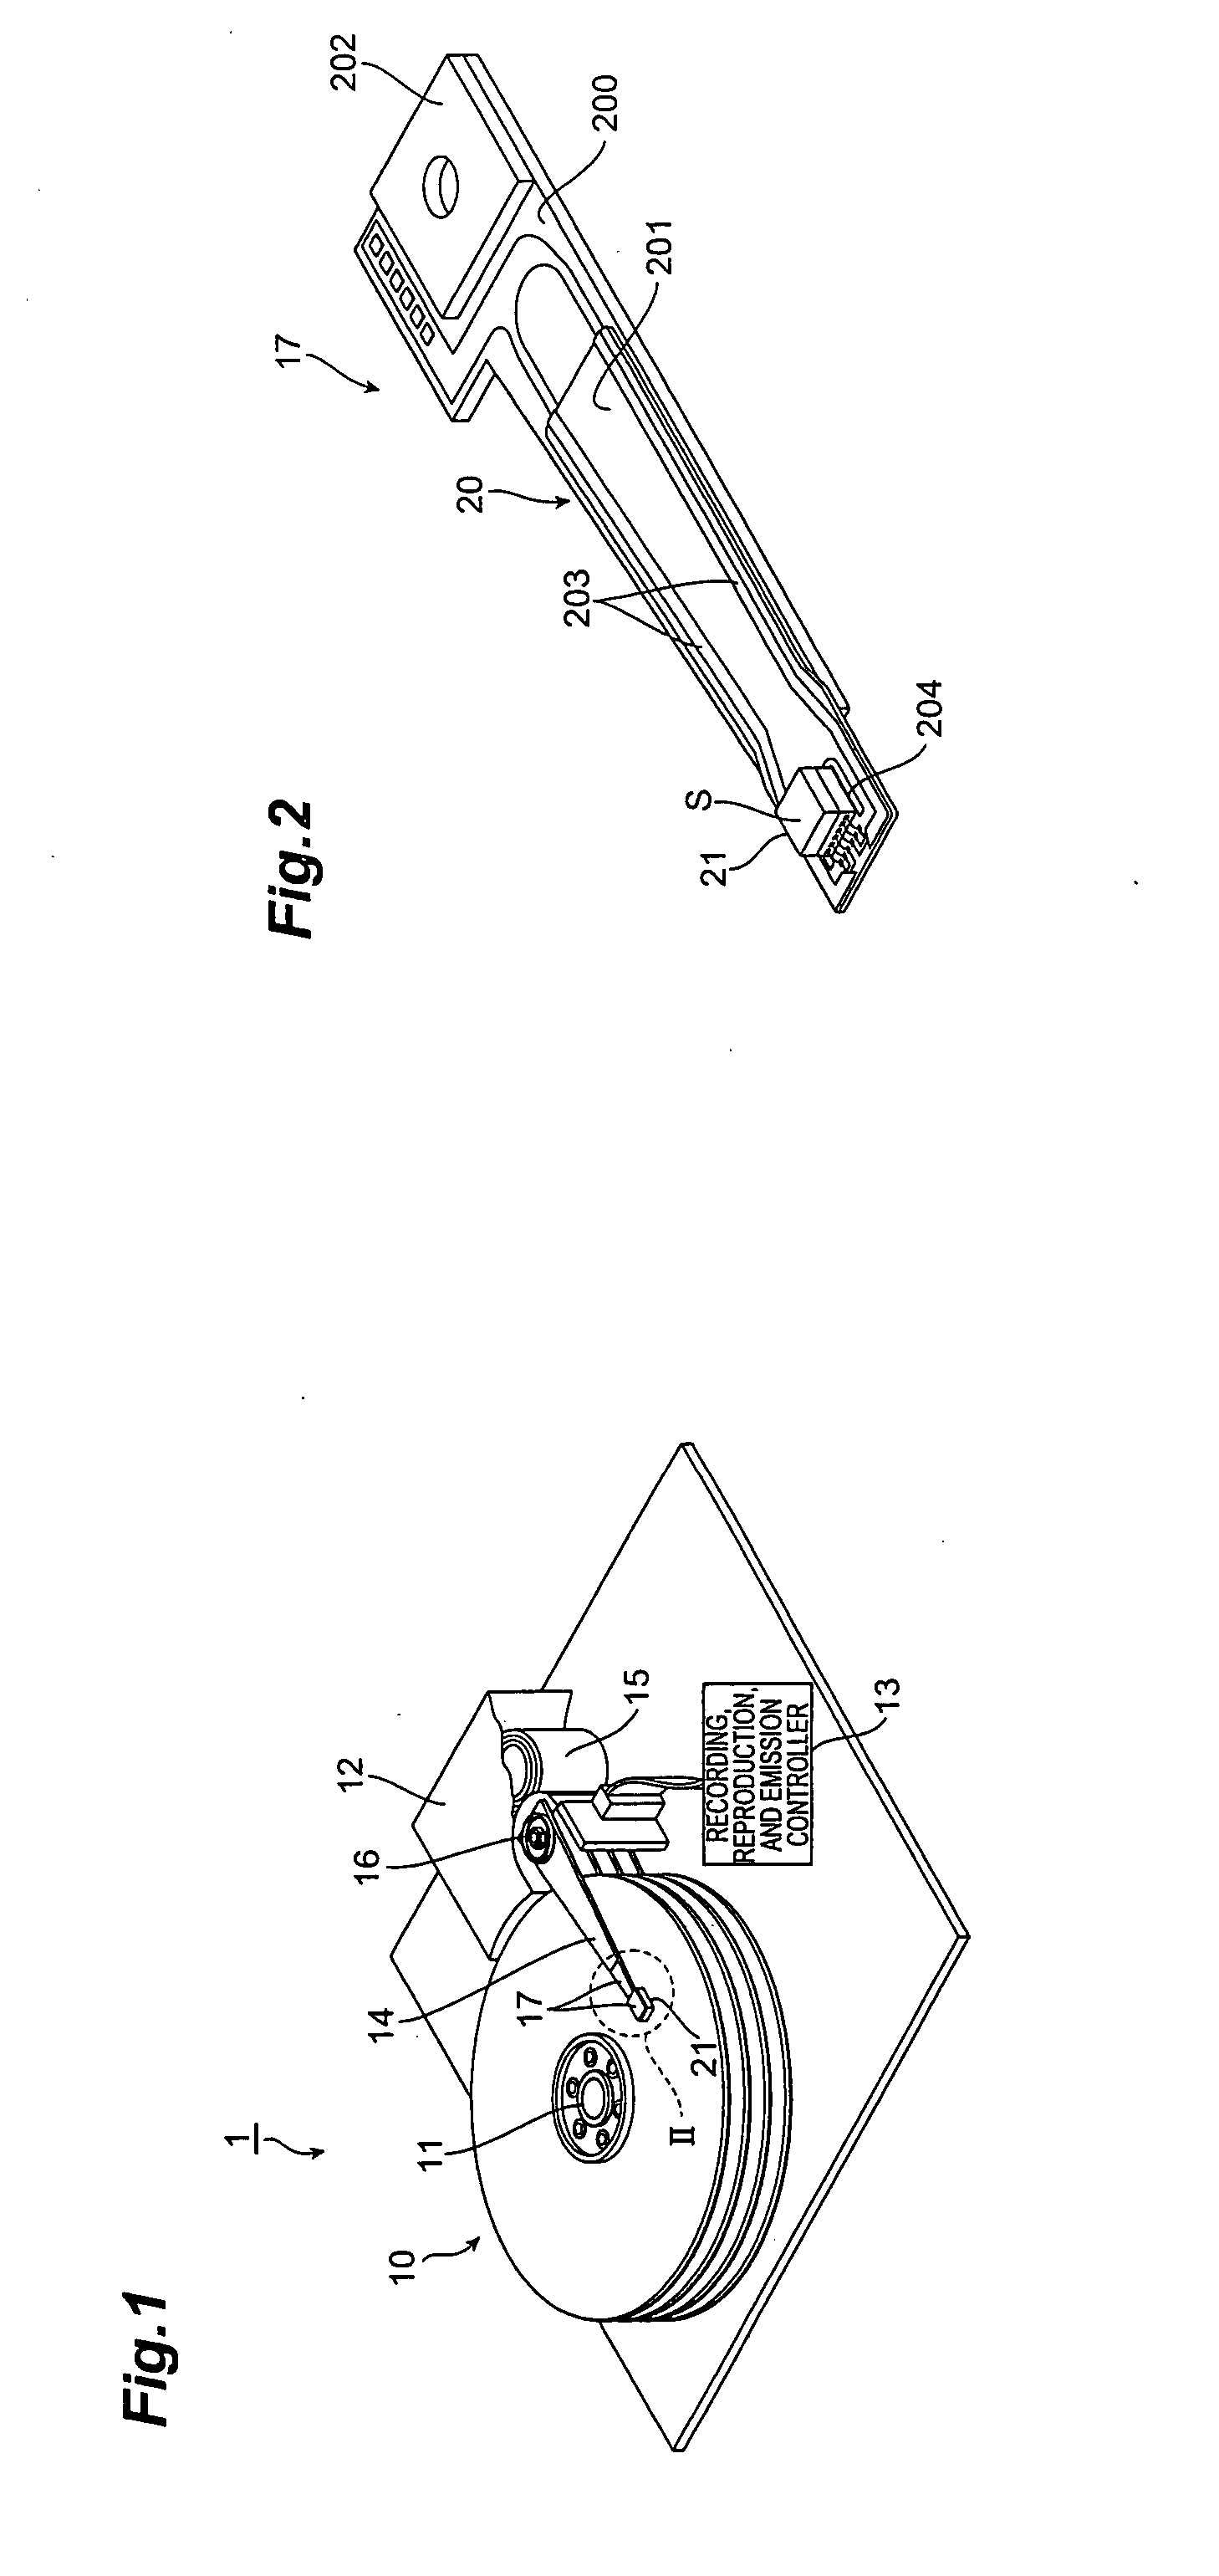 Thermally assisted magnetic head, head gimbal assembly, and hard disk drive